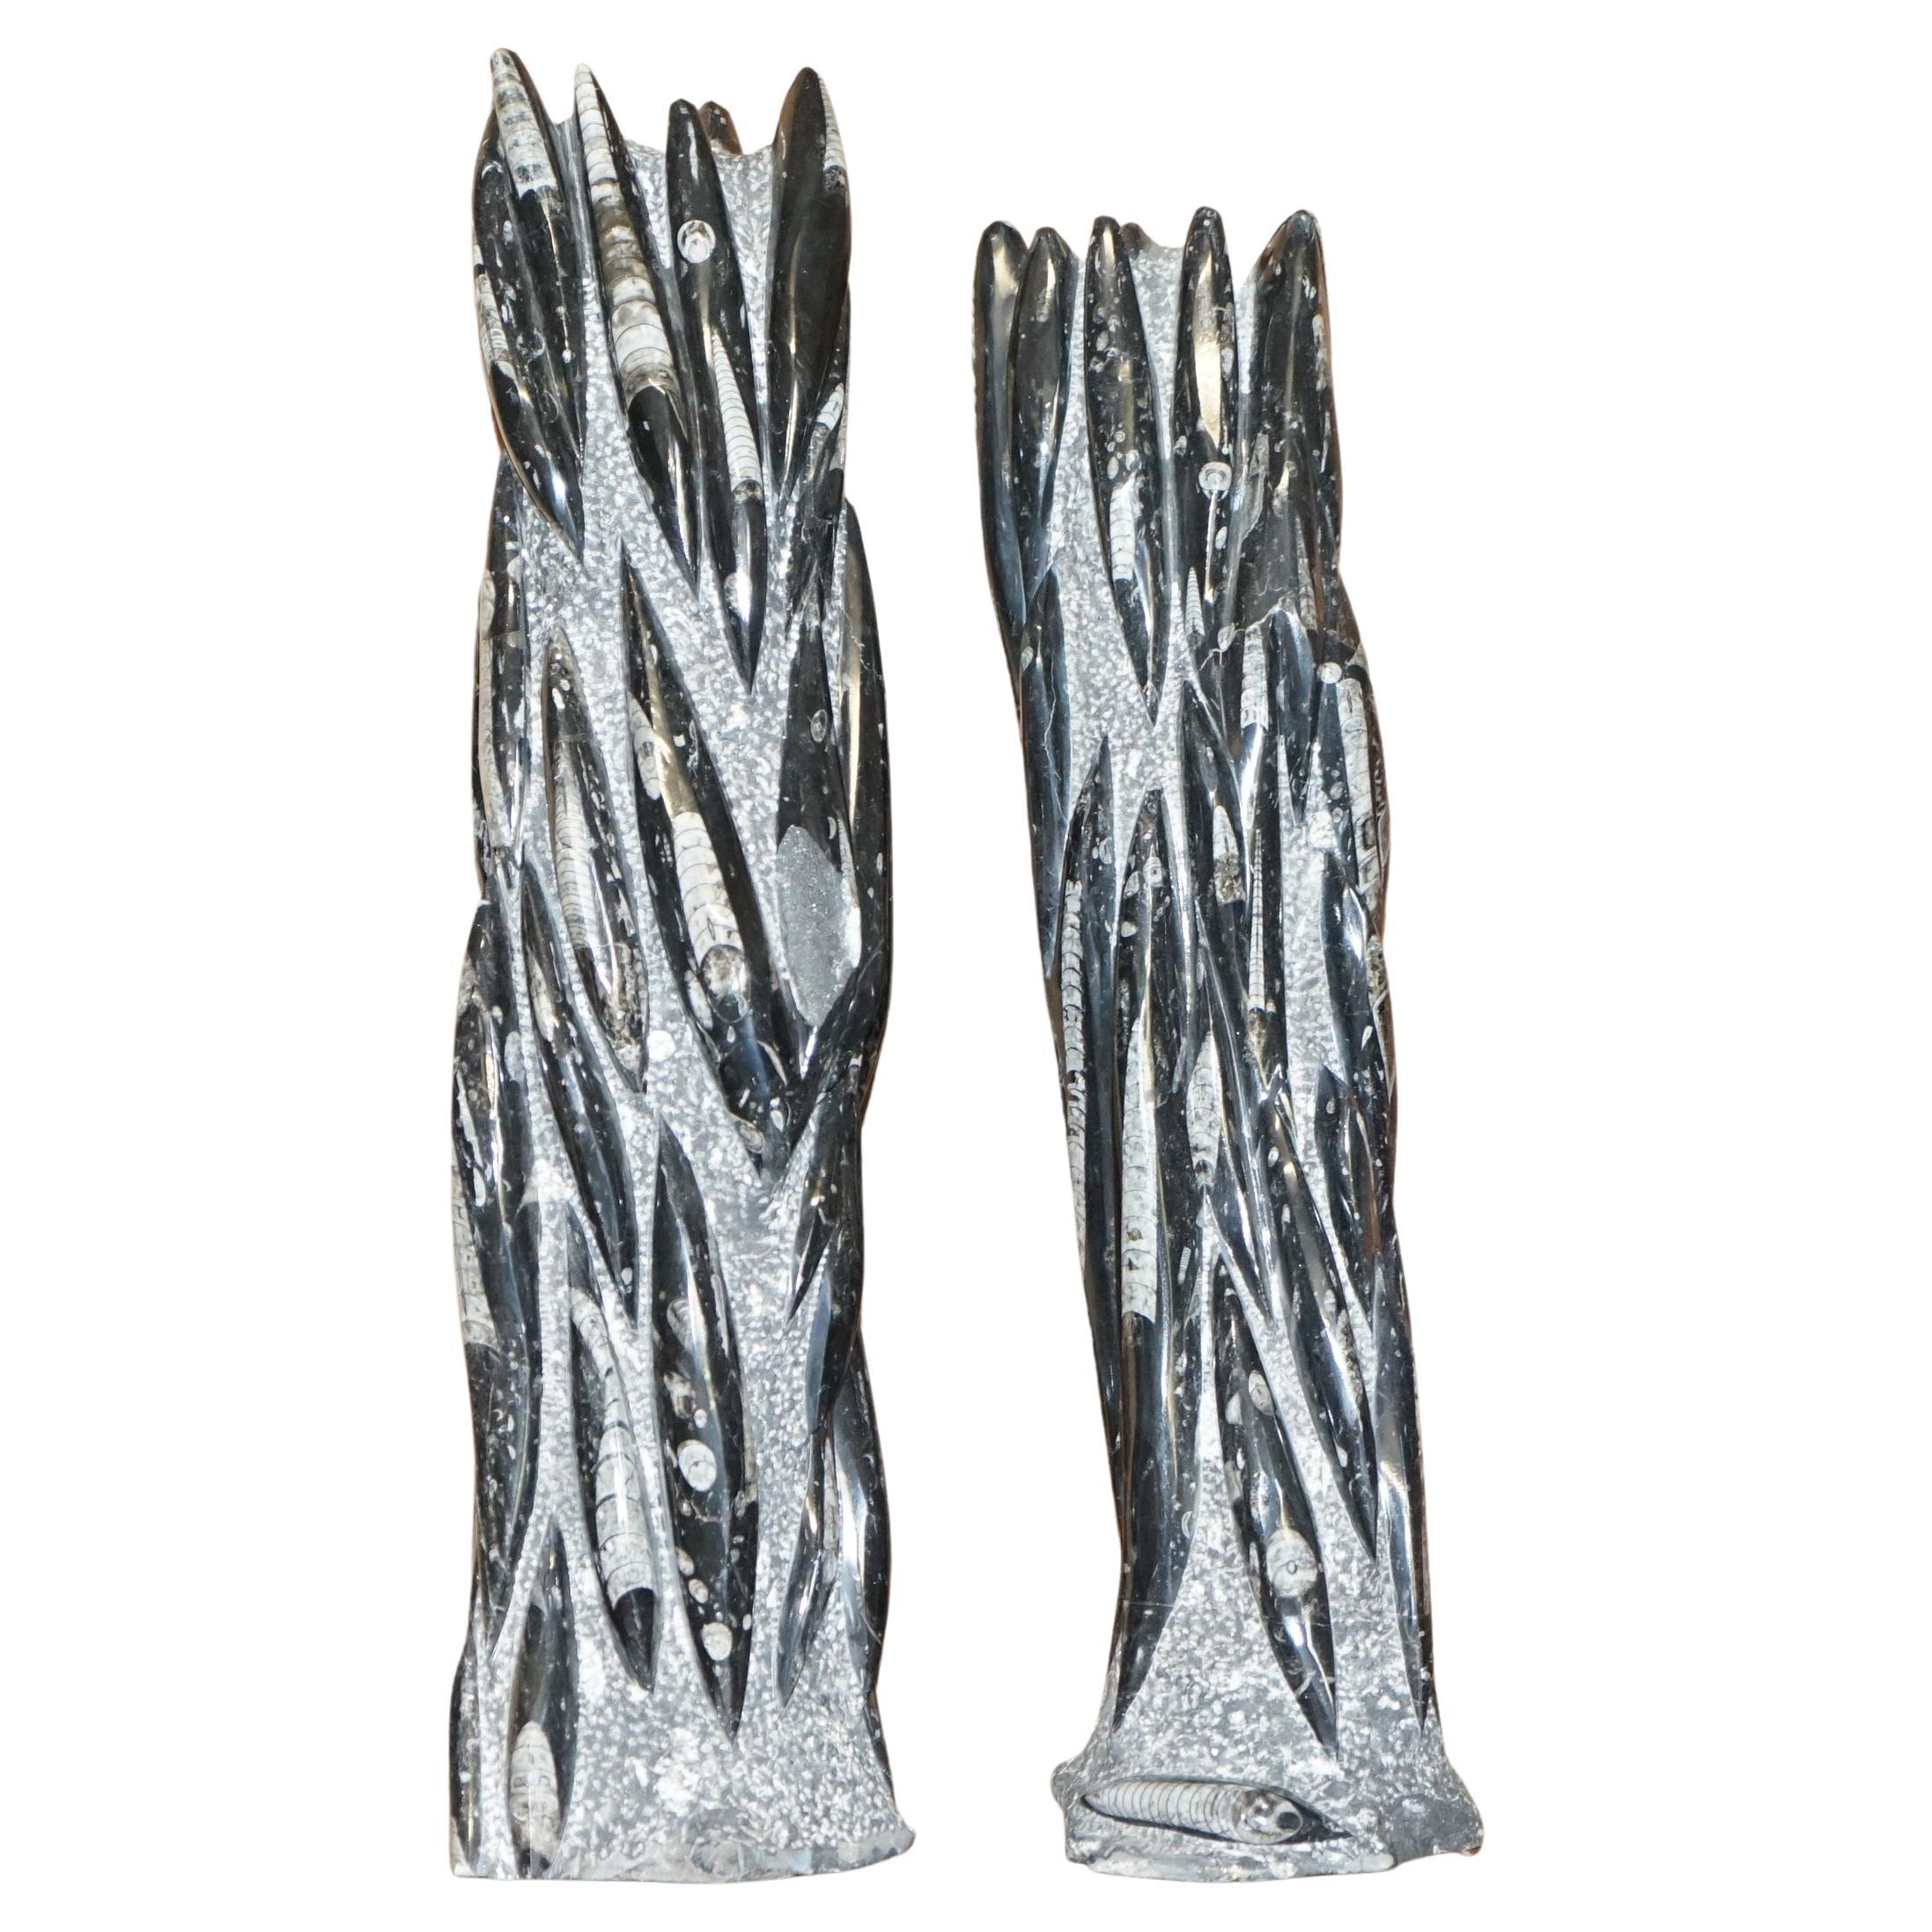 Pair of Large 395 Million Year Old Fossilized Orthoceras Marble Finish Statues For Sale